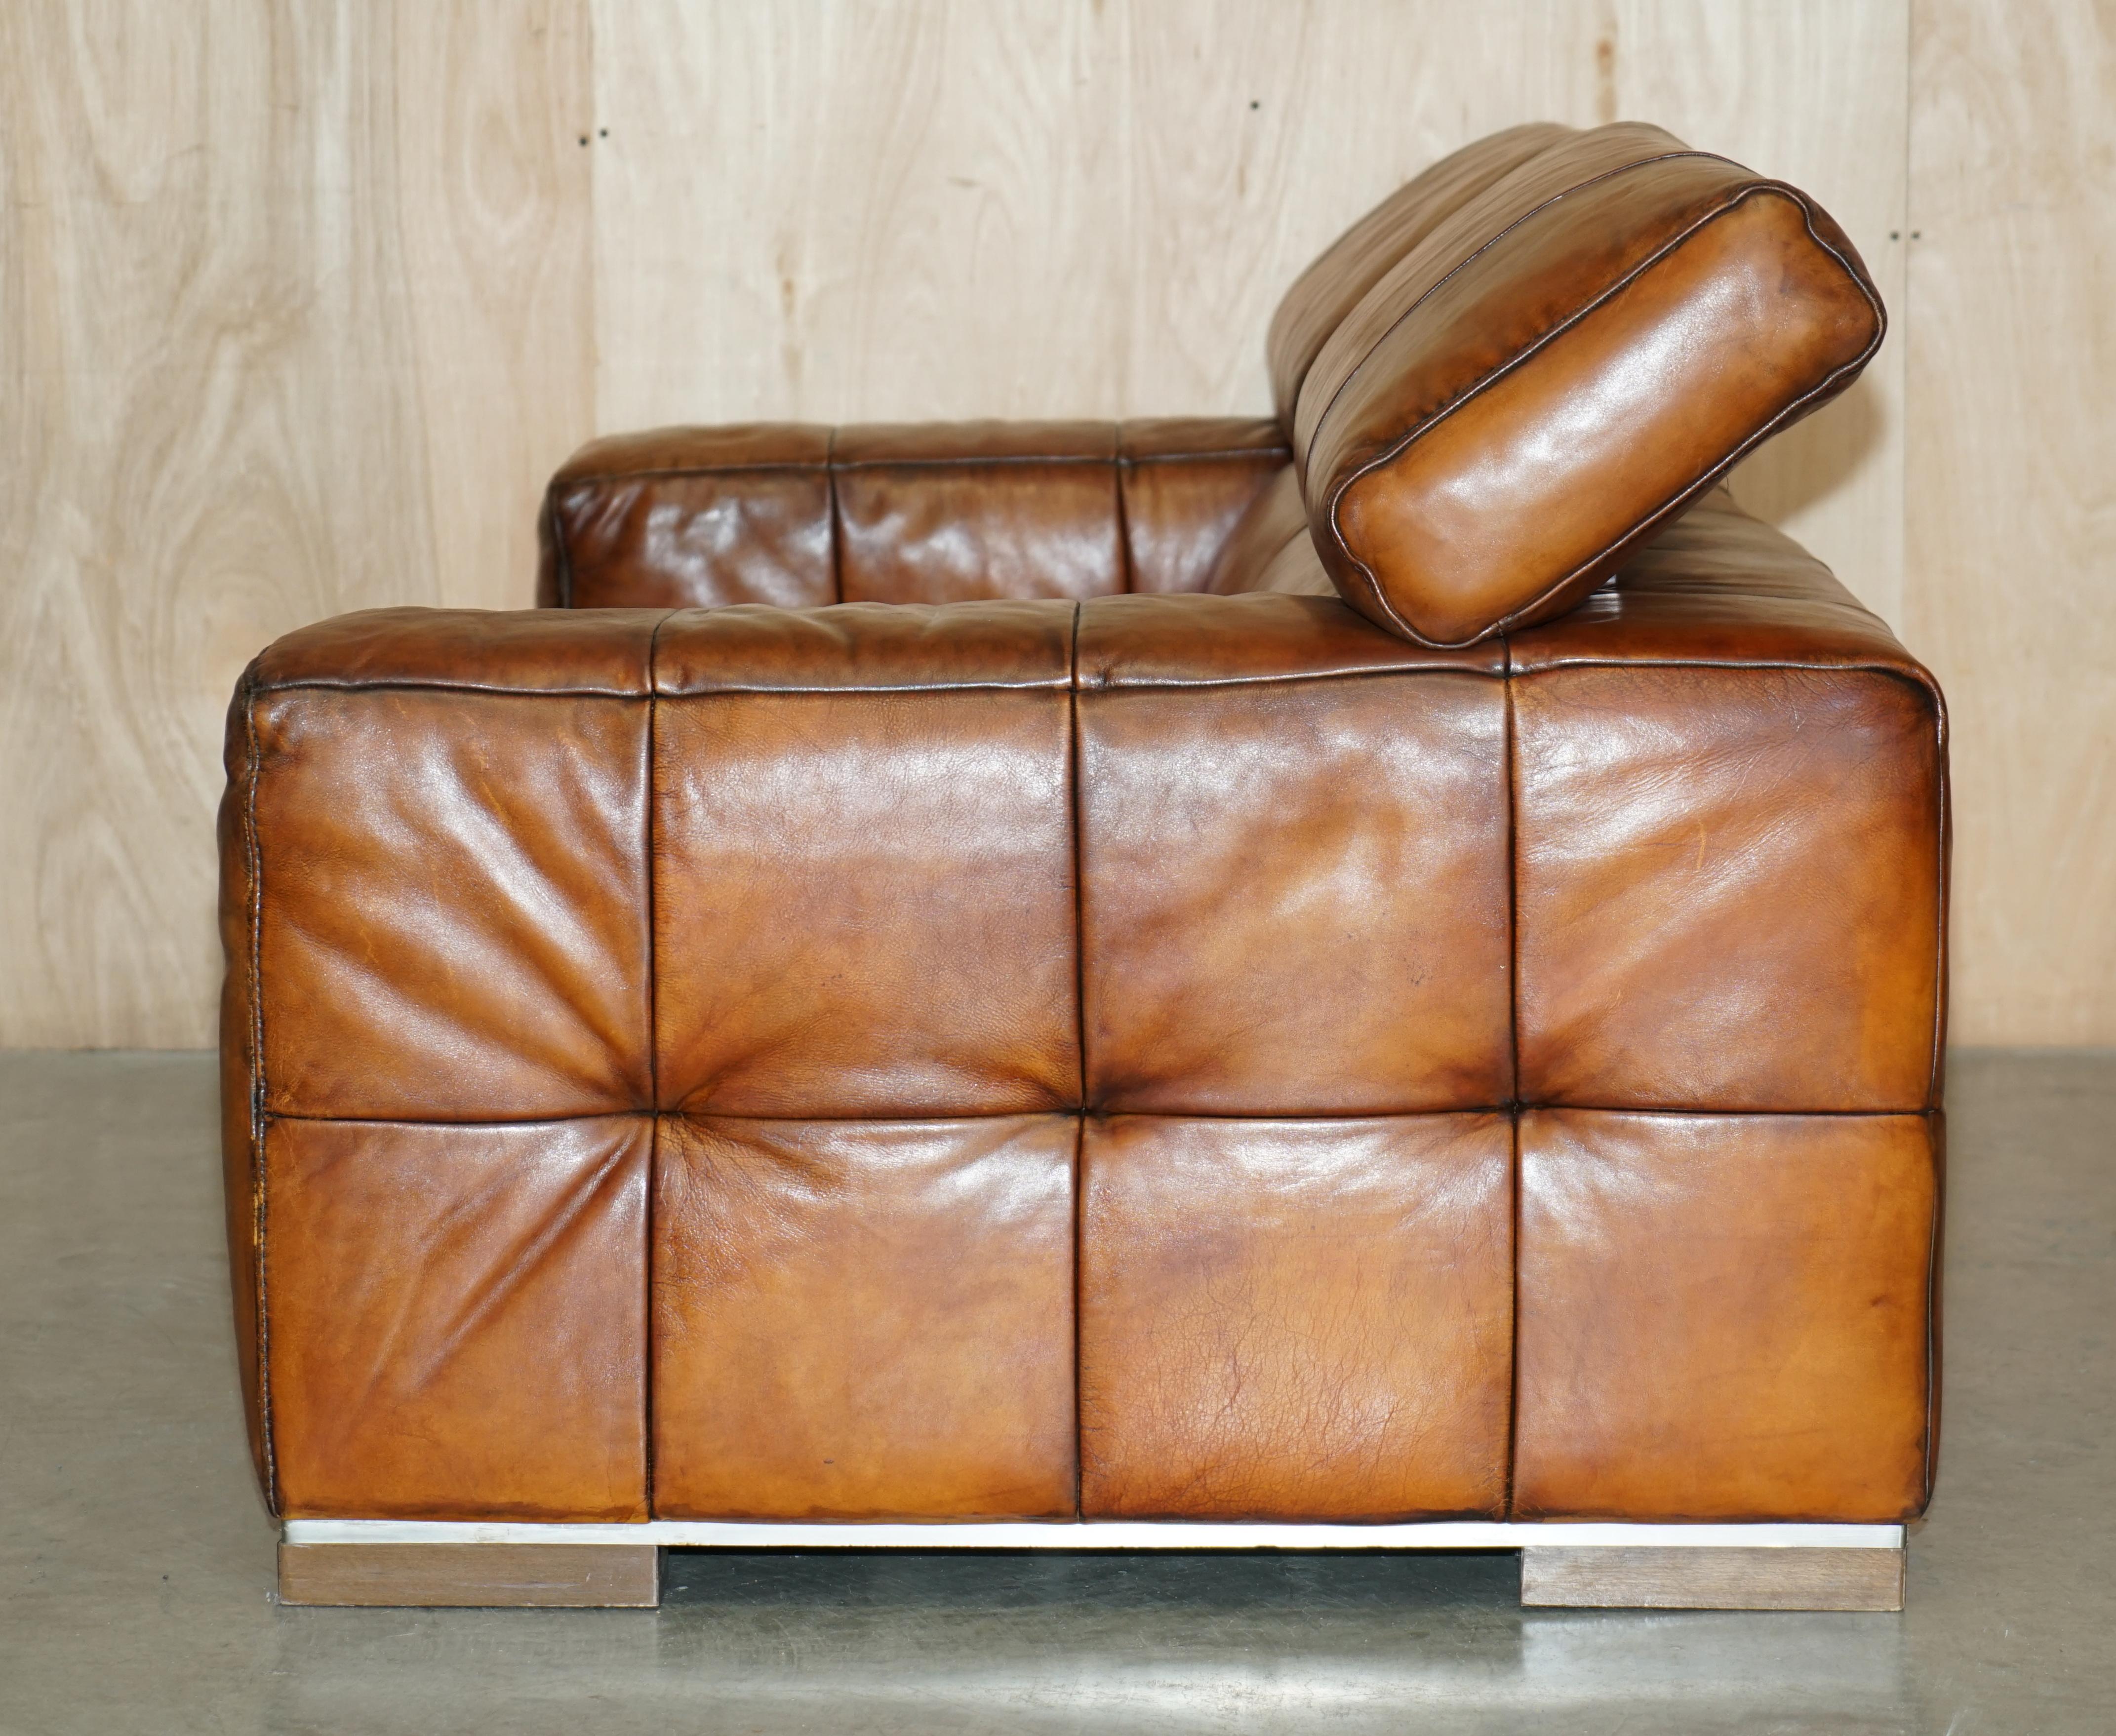 Natuzzi Roma Hand Dyed Cigar Brown Leather Sofa Raising Headrest Part of a Suite For Sale 9